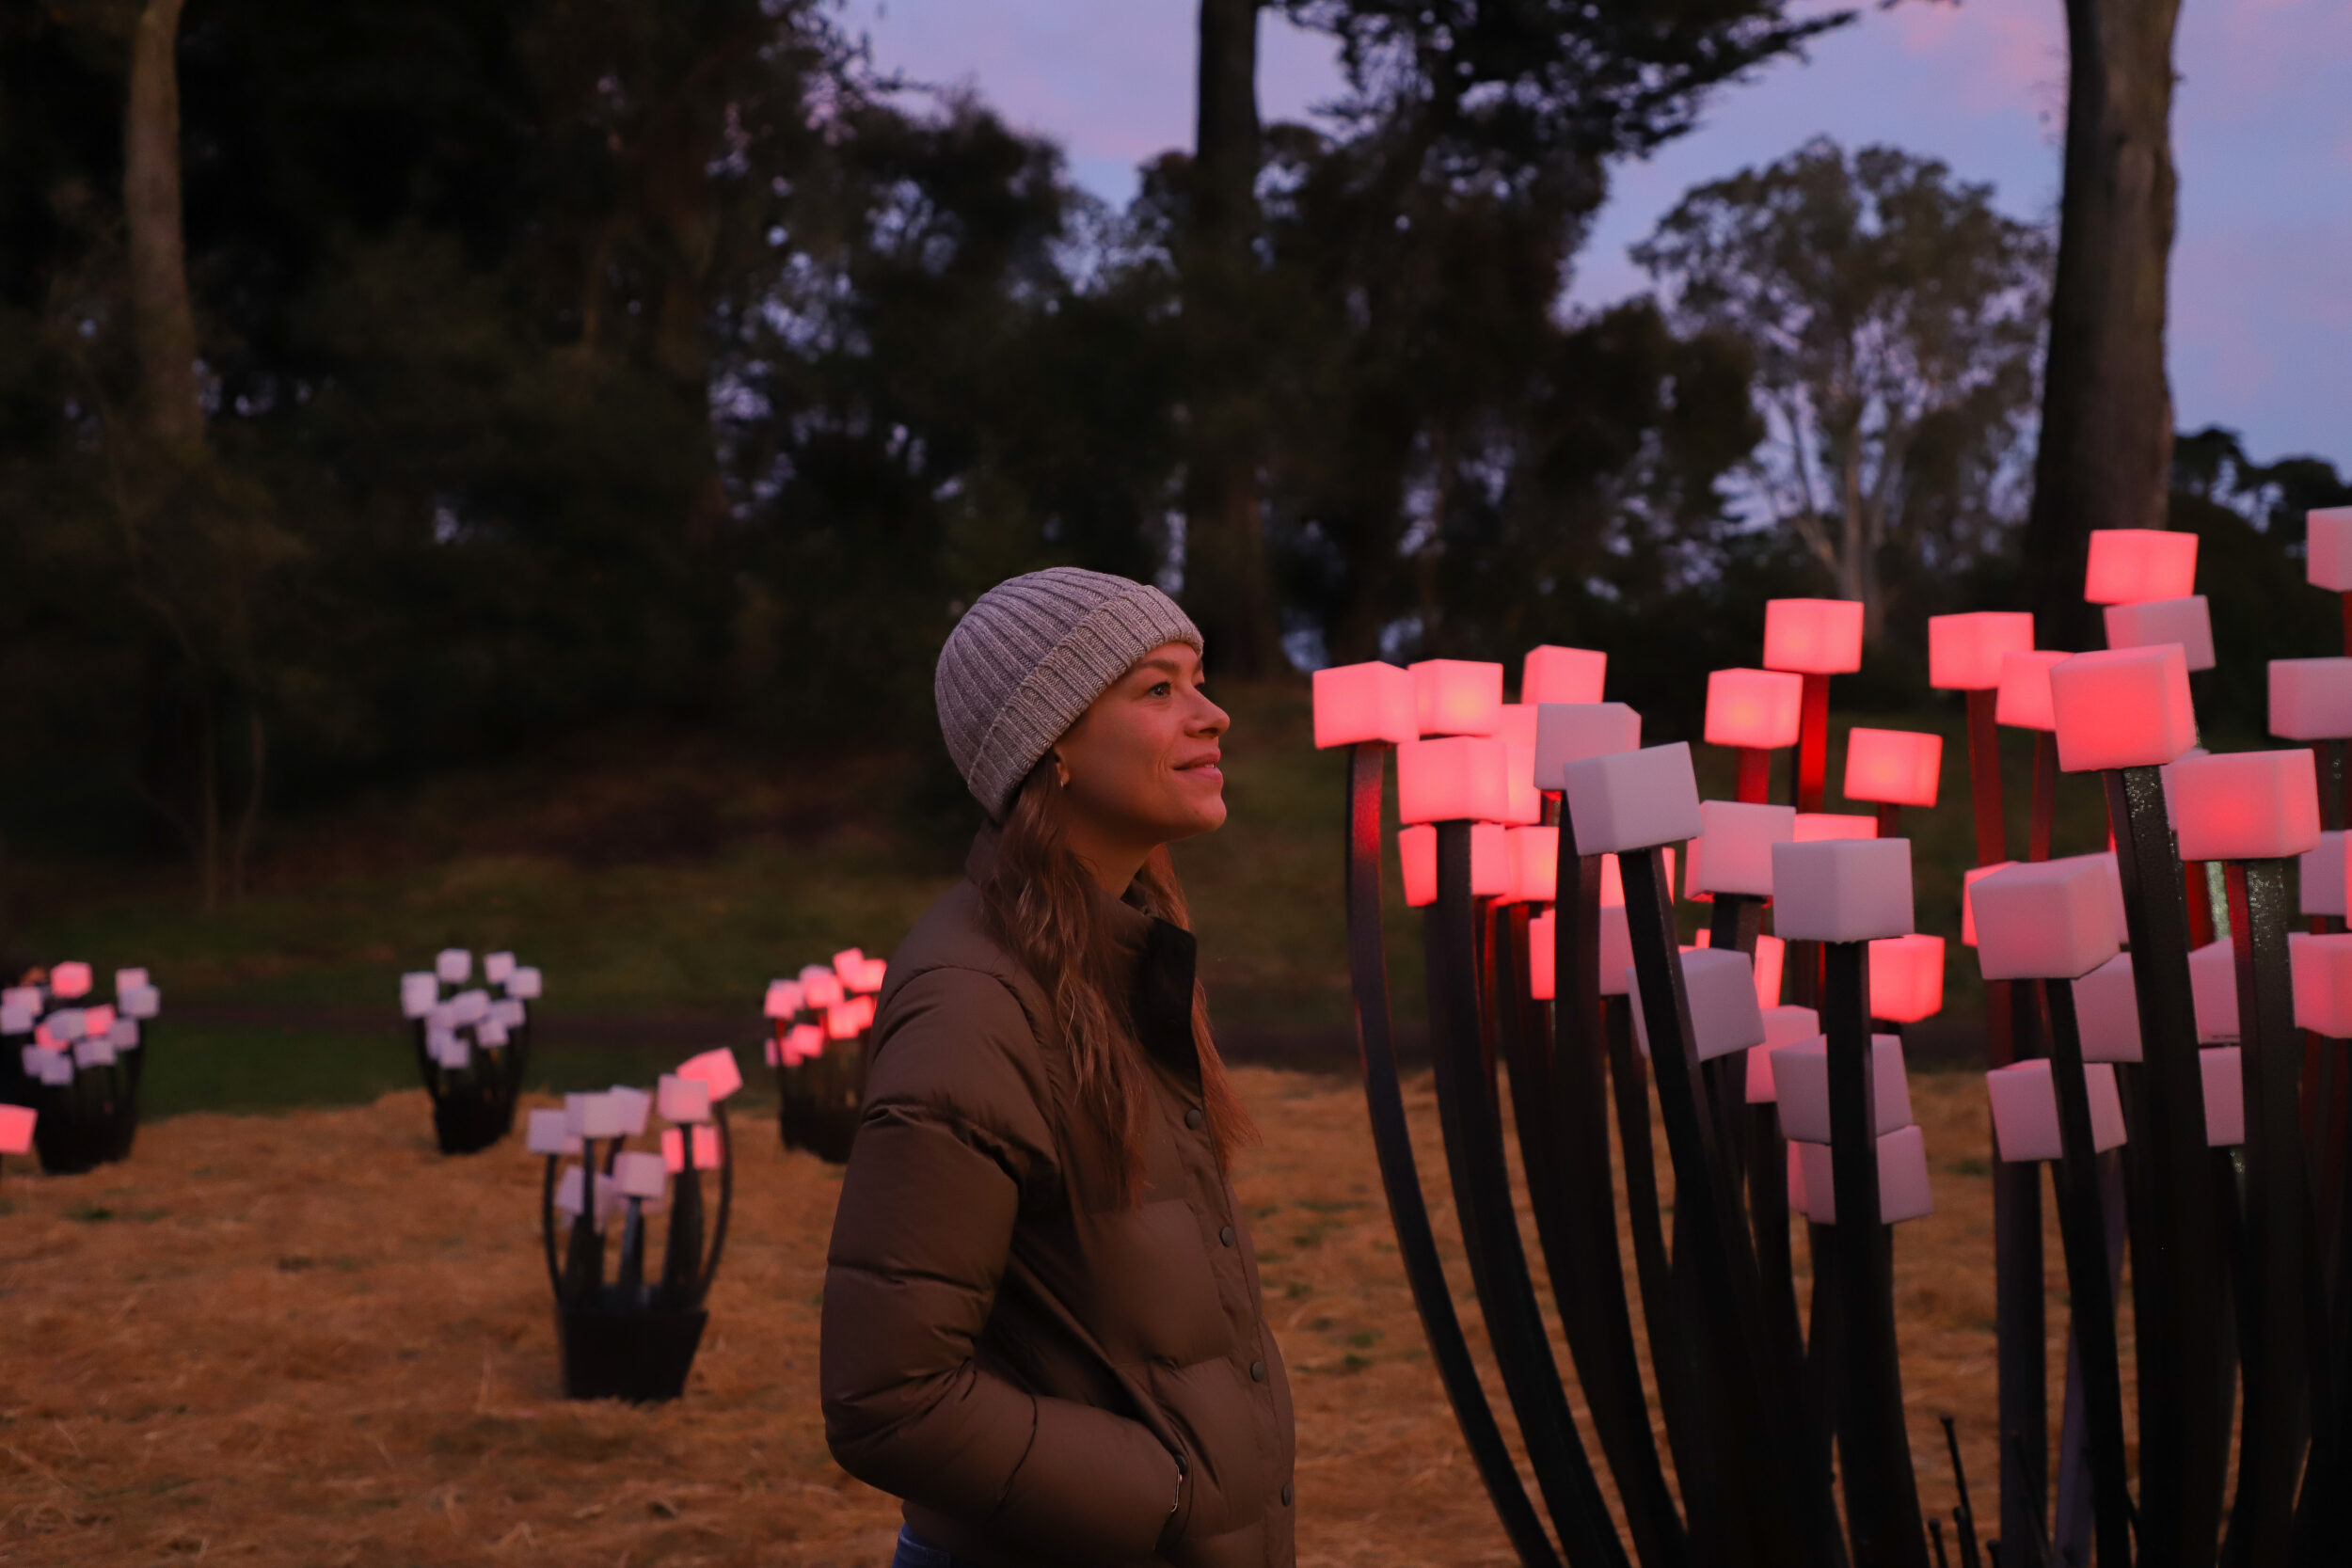 A woman in a beanie looks at an art installation of red cubes in the shape of shrubs.